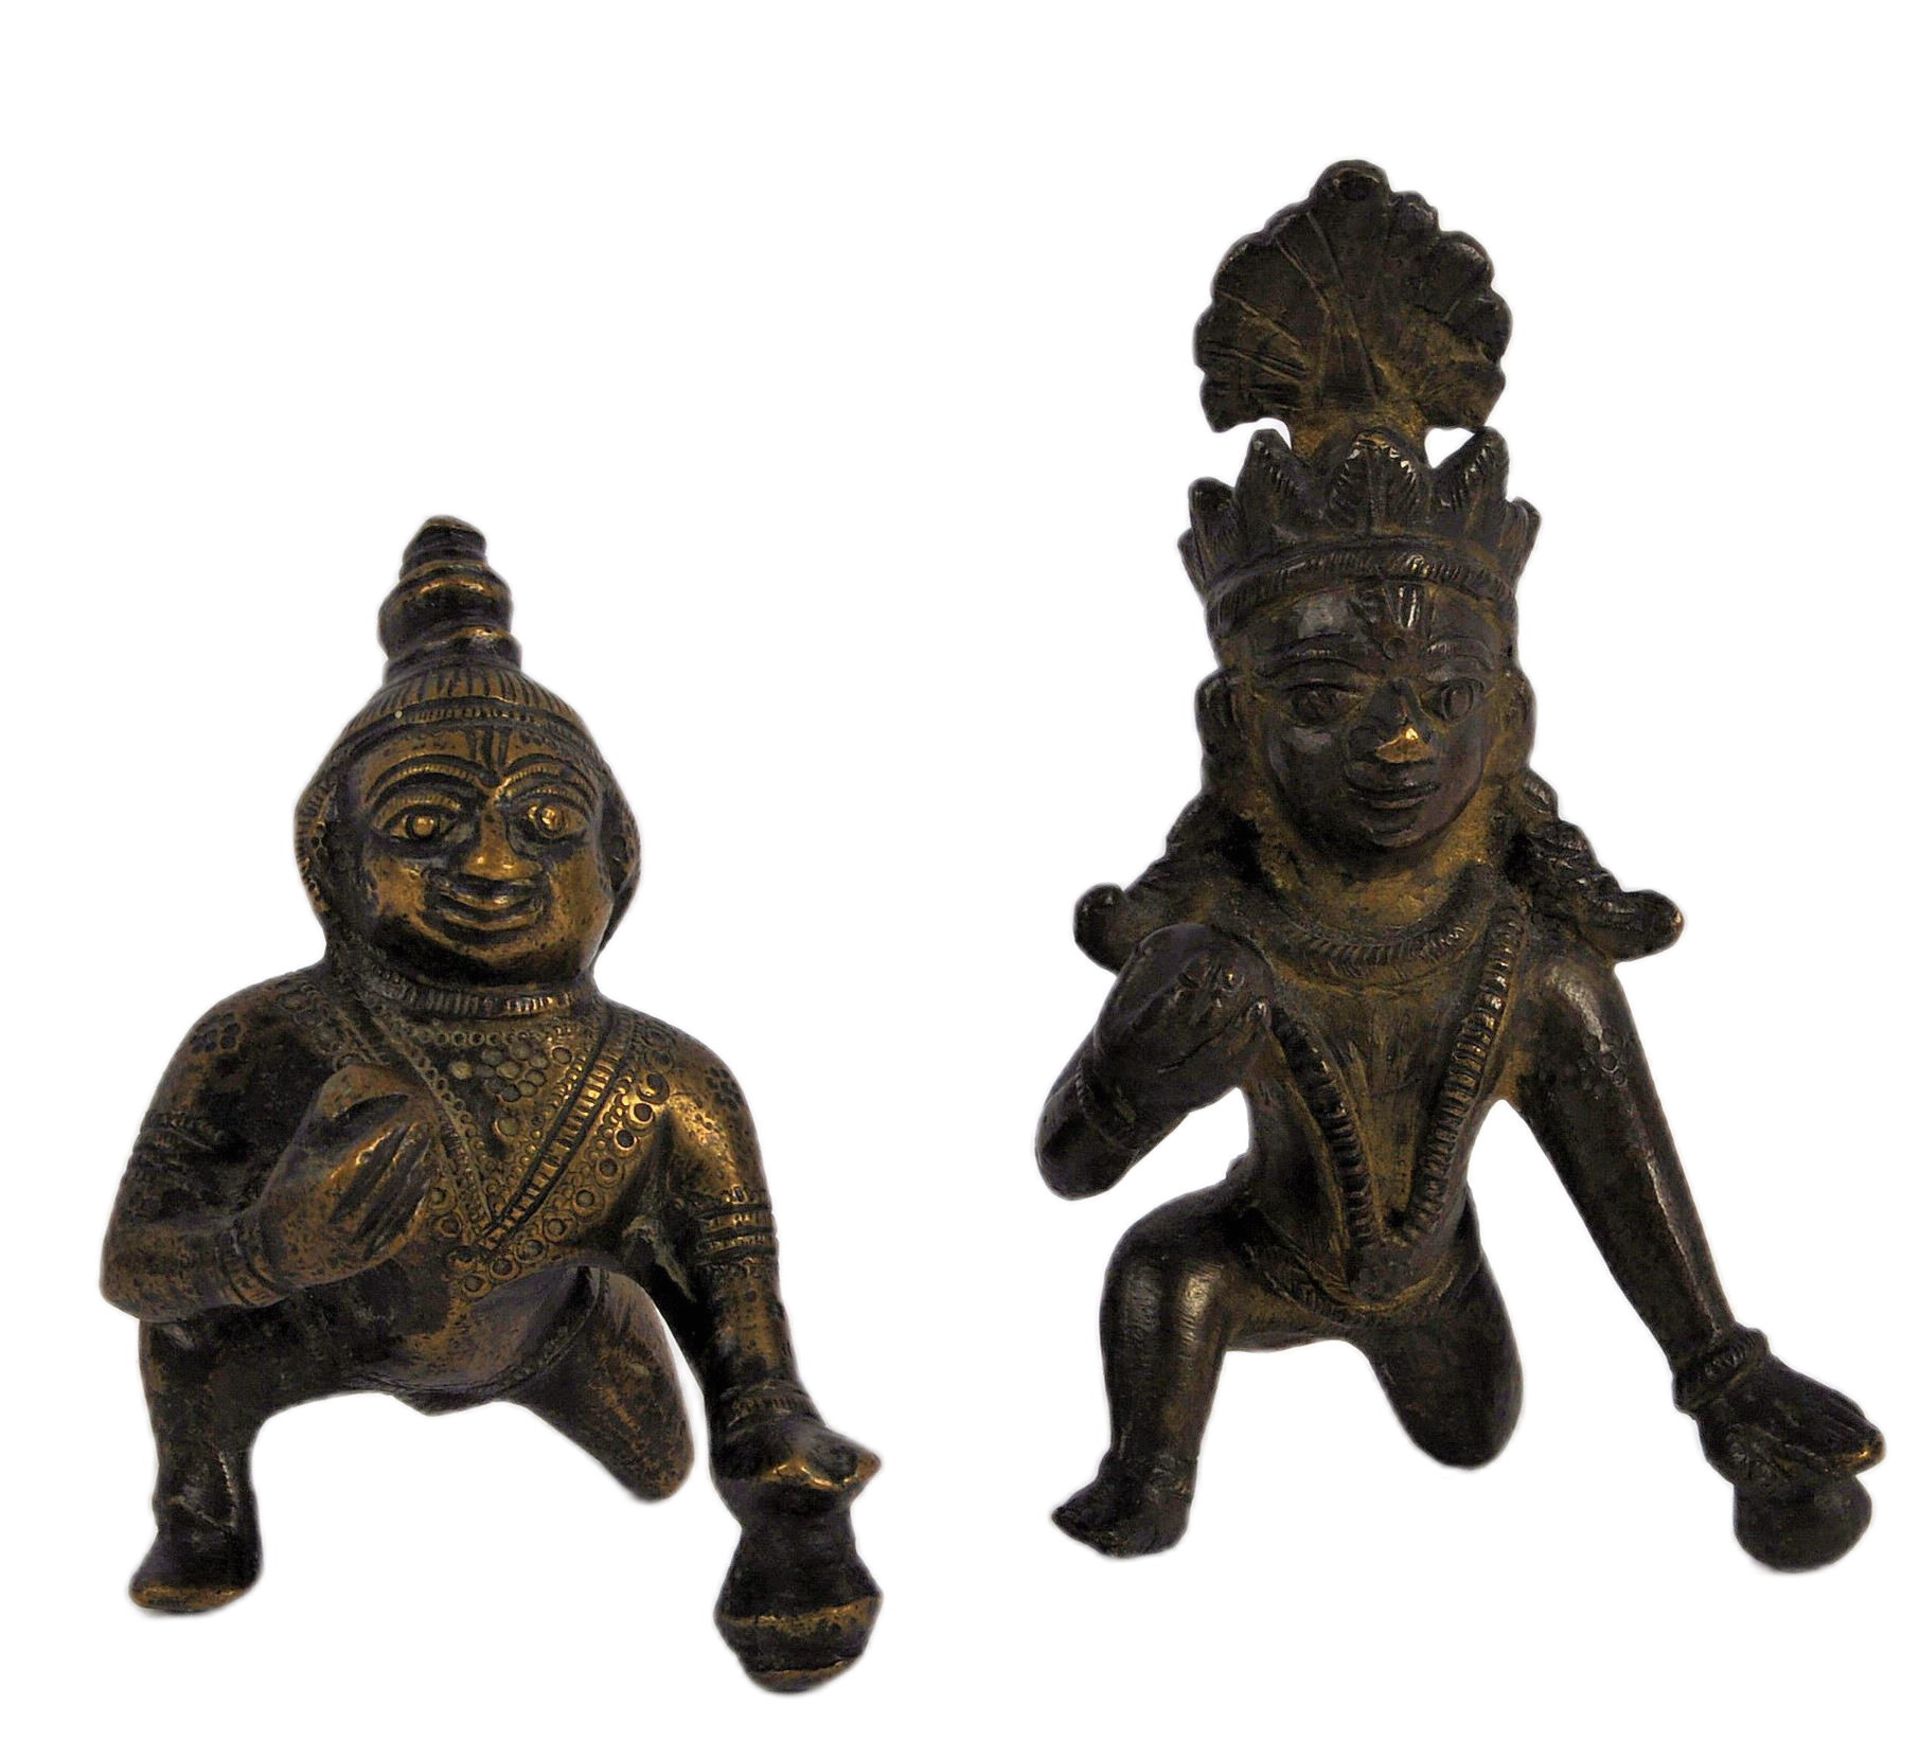 TWO ANTIQUE 19TH / 20TH INDIAN HINDU BRONZE FIGURINES OF KRISHNA